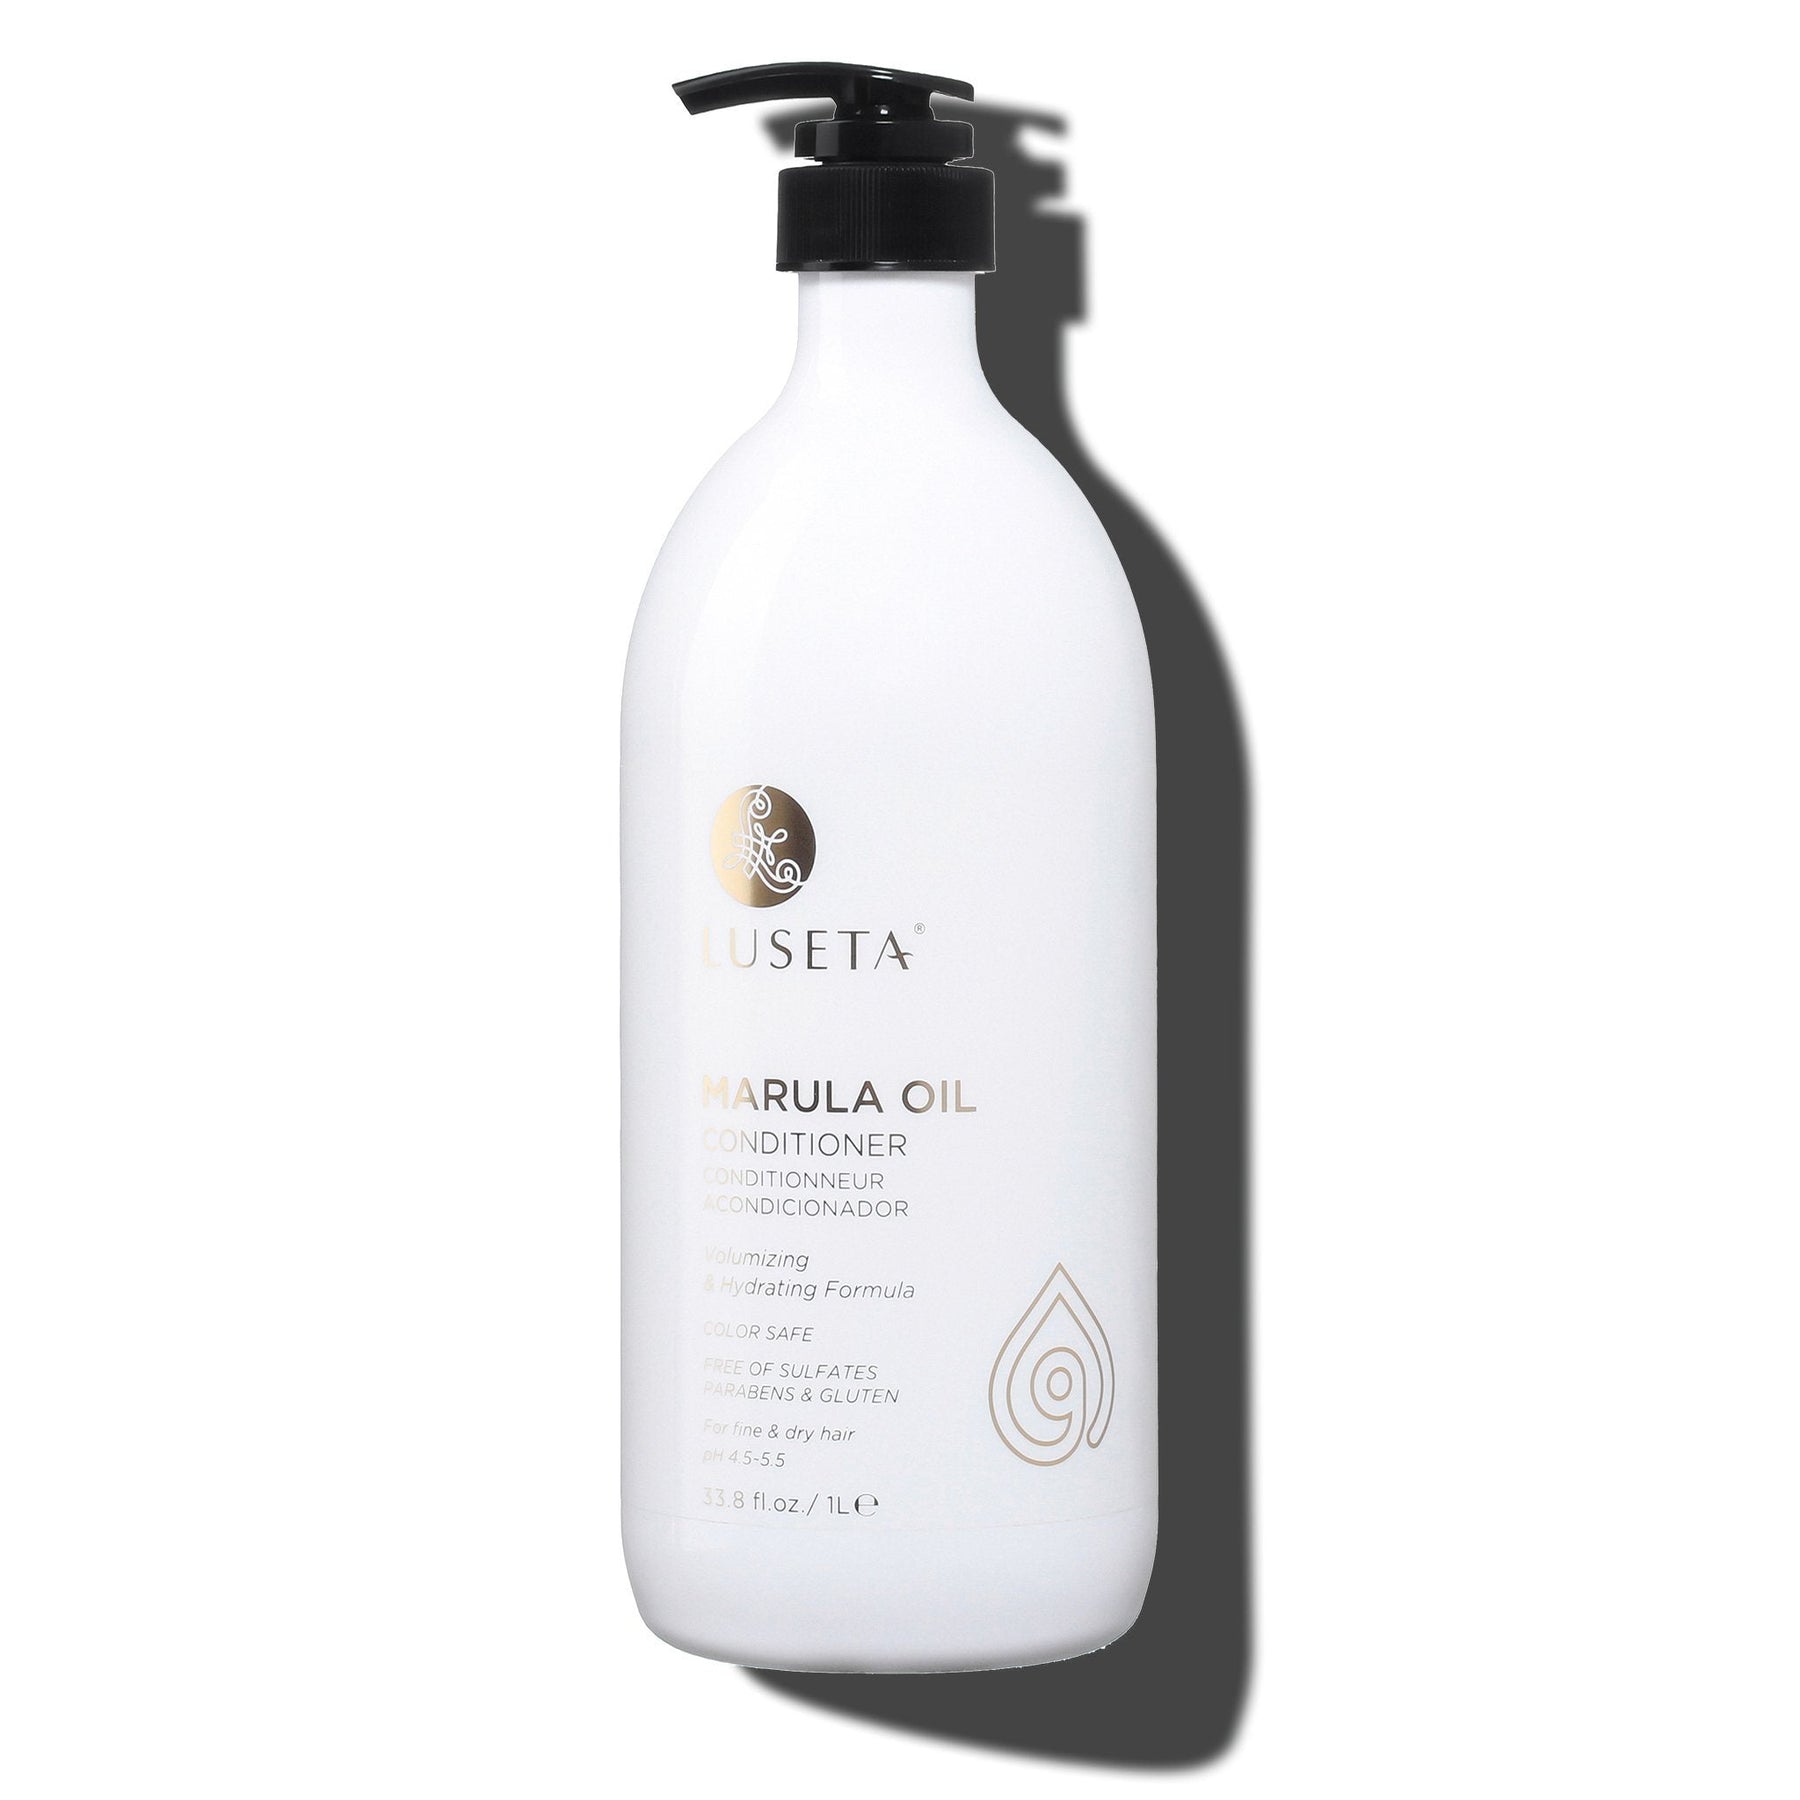 Marula Oil Conditioner - 33.8oz - by Luseta Beauty |ProCare Outlet|